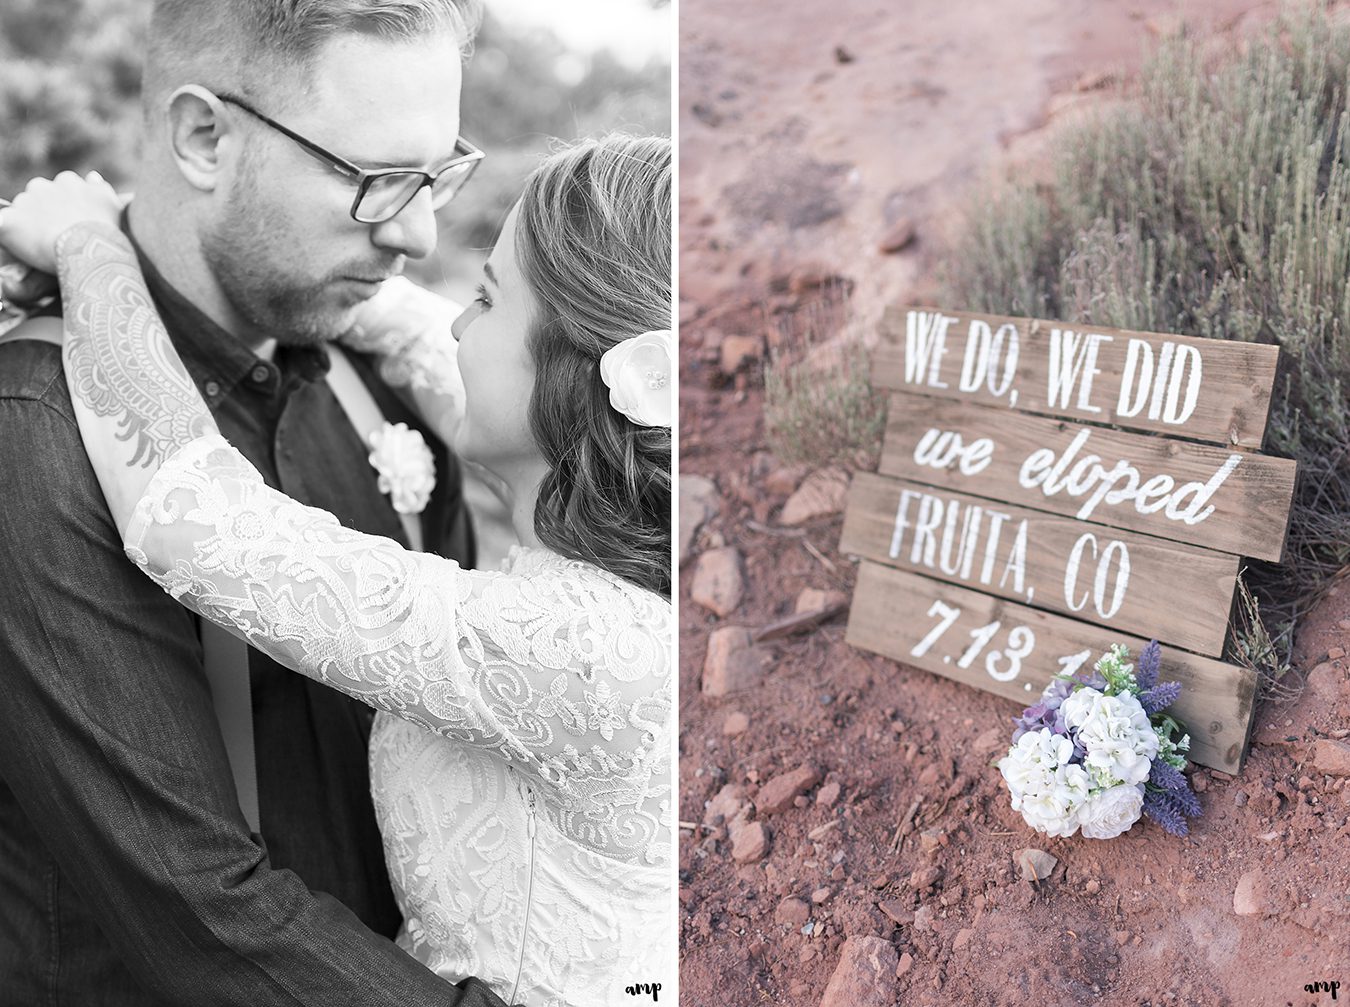 We do. We did. We Eloped. sign for an elopement